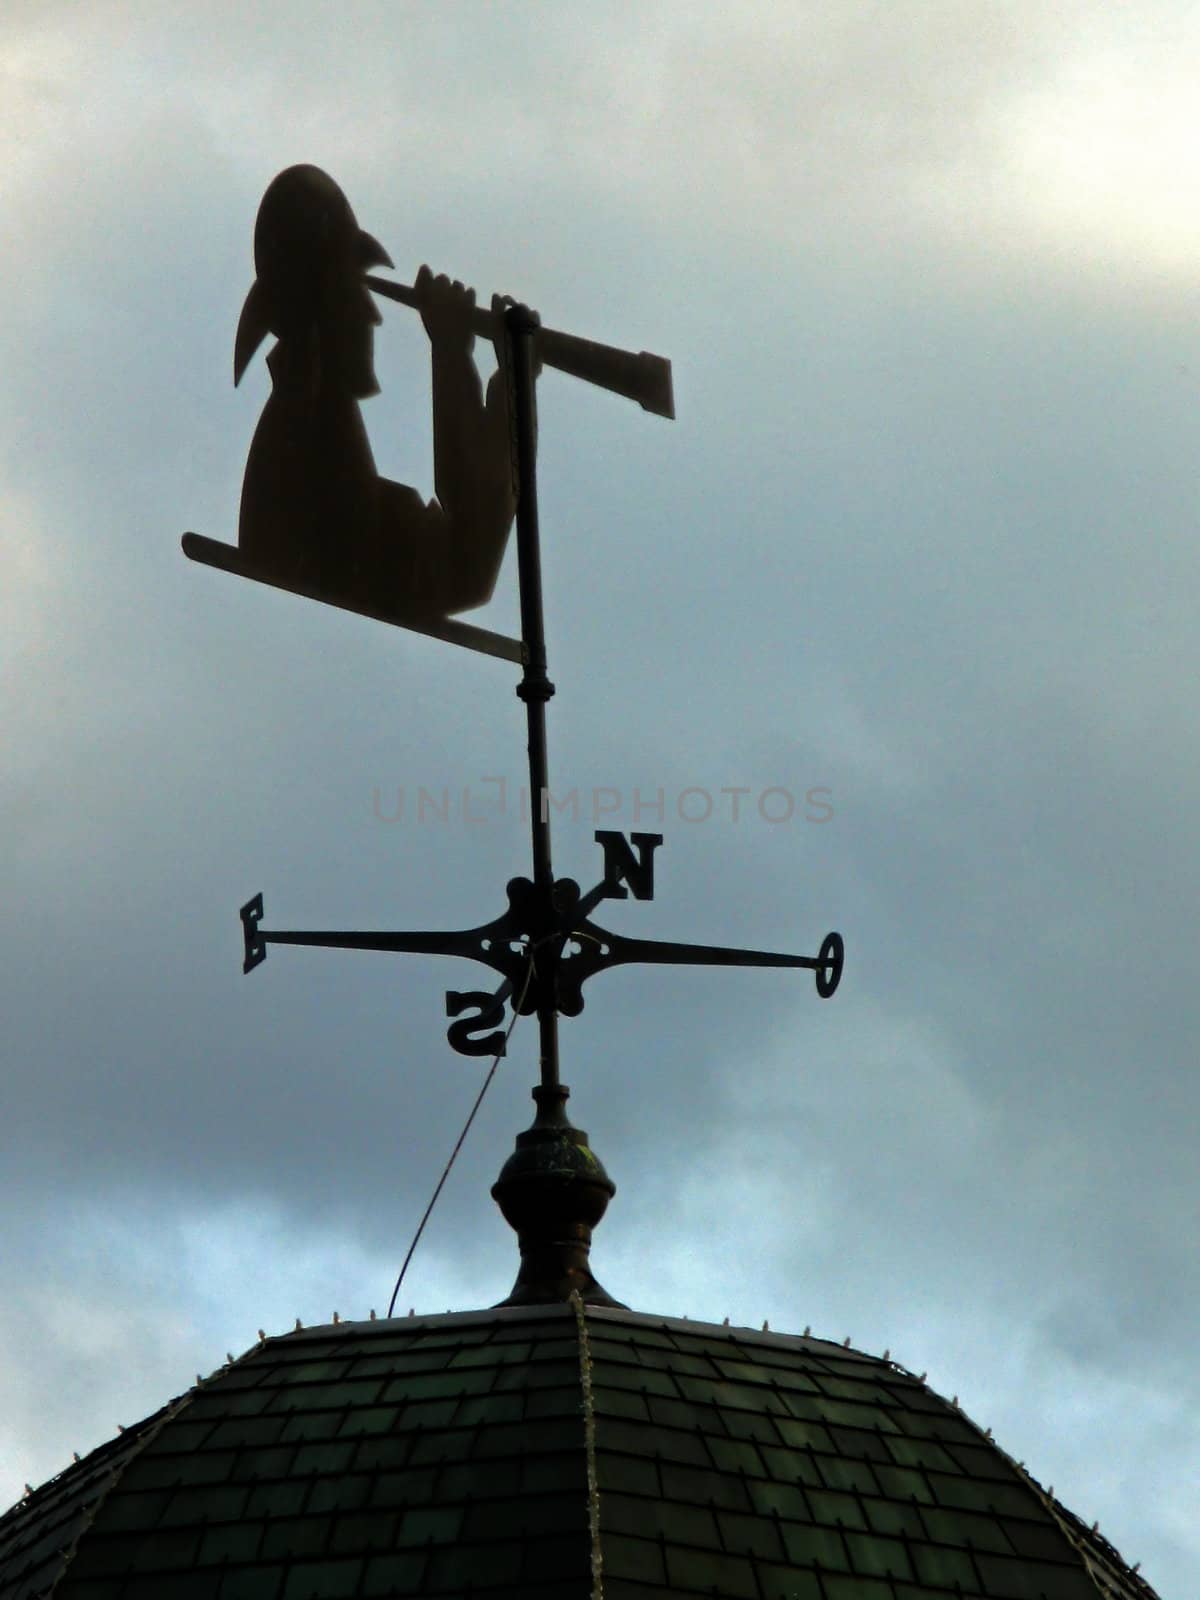 A weather vane with person looking through a telescope.